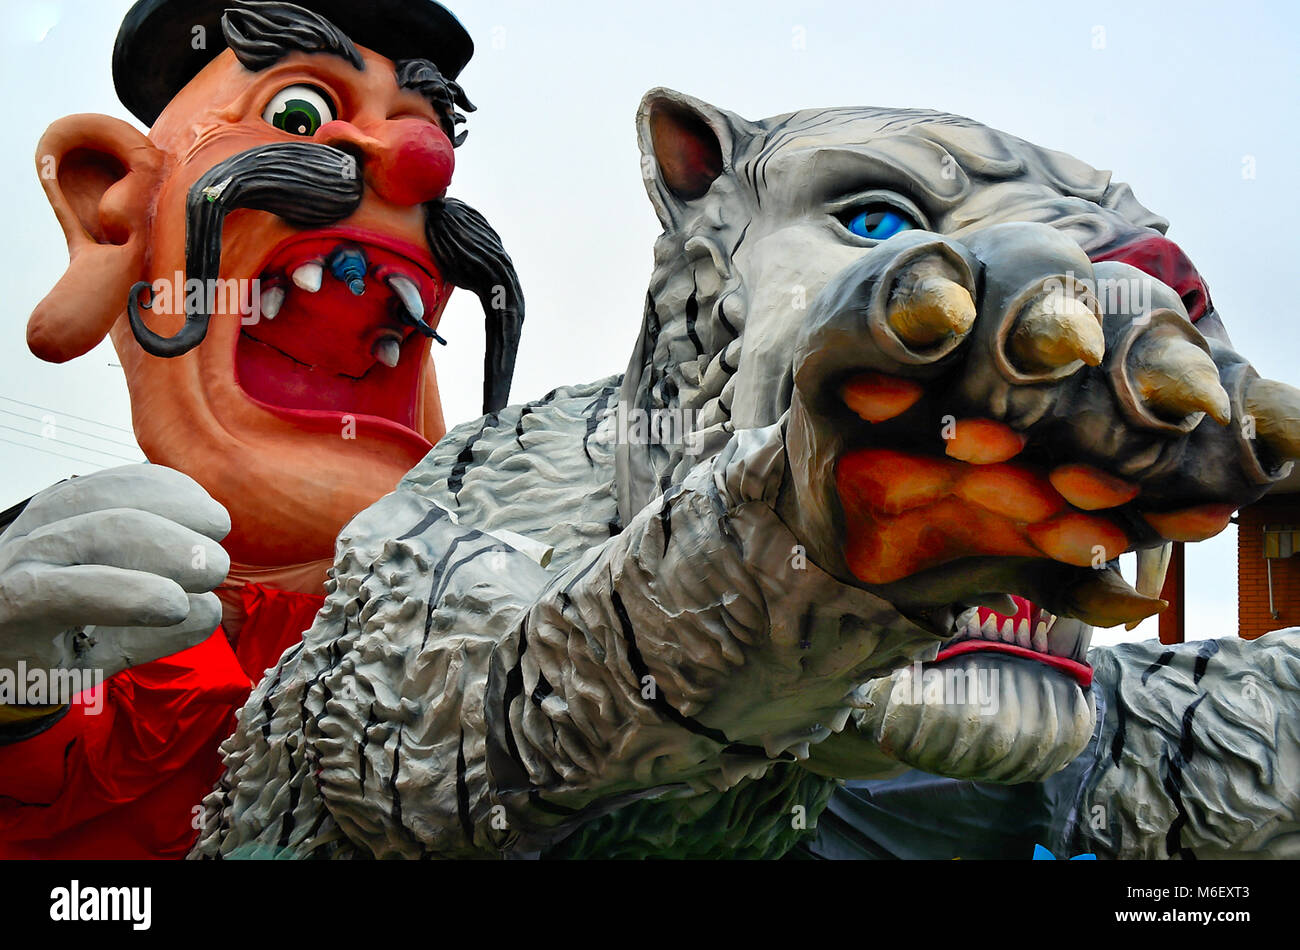 Cadoneghe, Veneto, Italy. The carnival of Cadoneghe is famous throughout the region for its allegorical floats. they are made of papier-mâché. Stock Photo